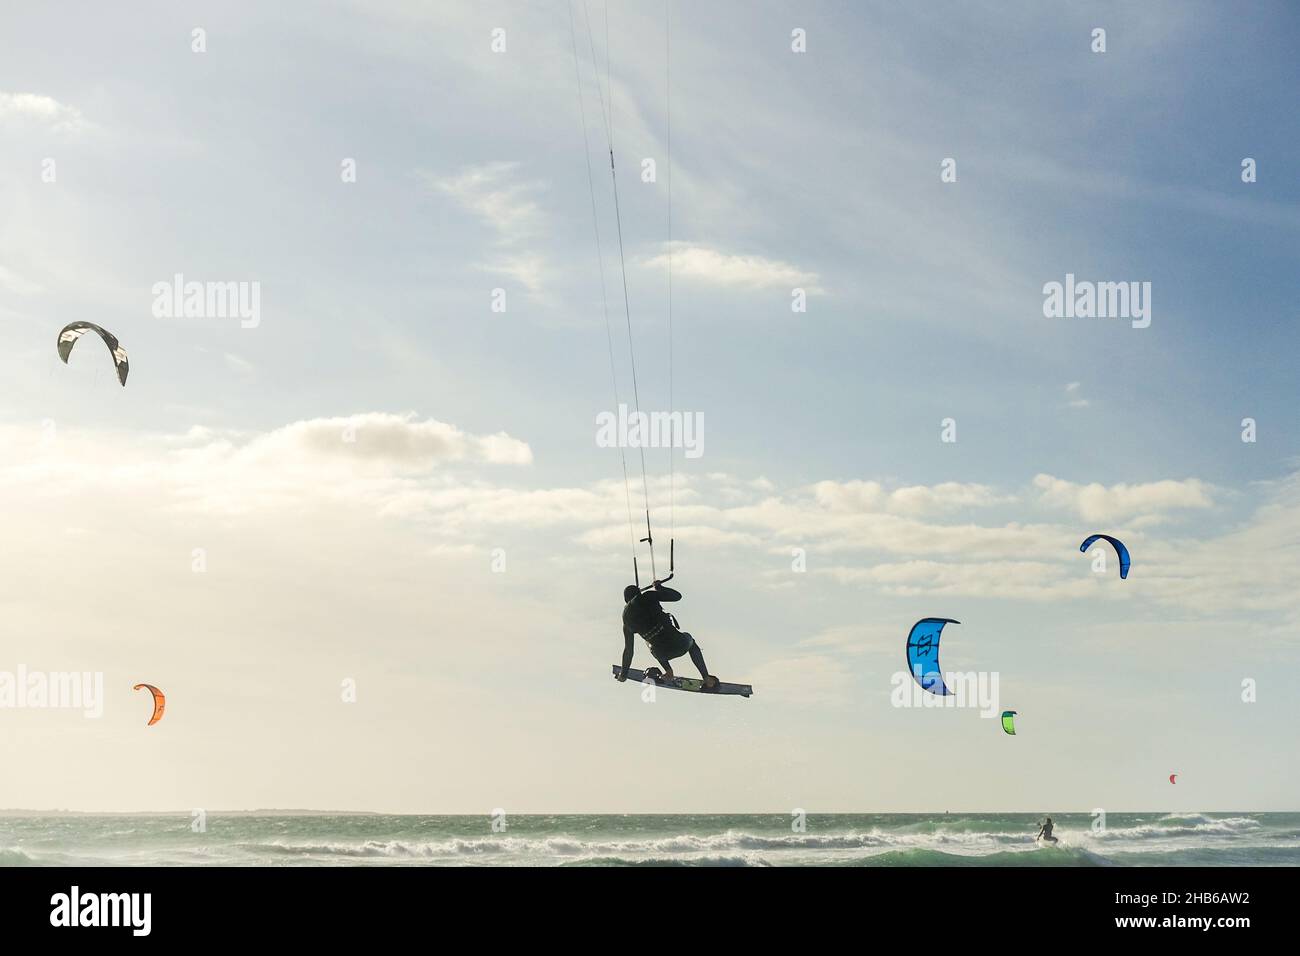 Kitesurfer performing a trick in the air while competing at the Red Bull King of the Air 2021 in Blouberg, Cape Town, South Africa Stock Photo